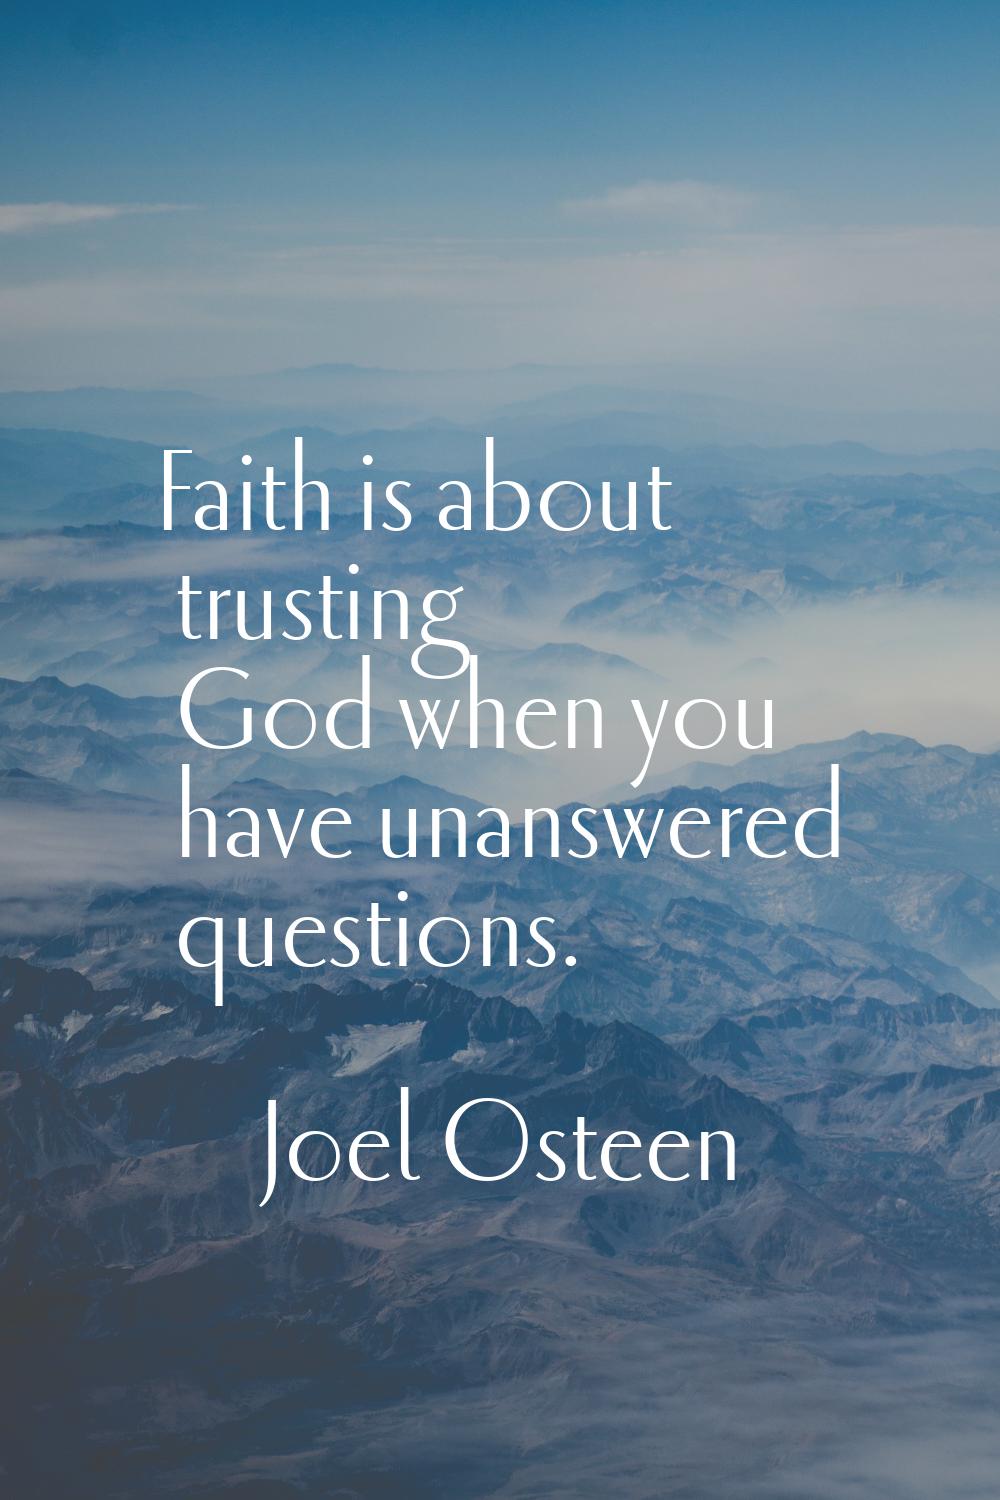 Faith is about trusting God when you have unanswered questions.